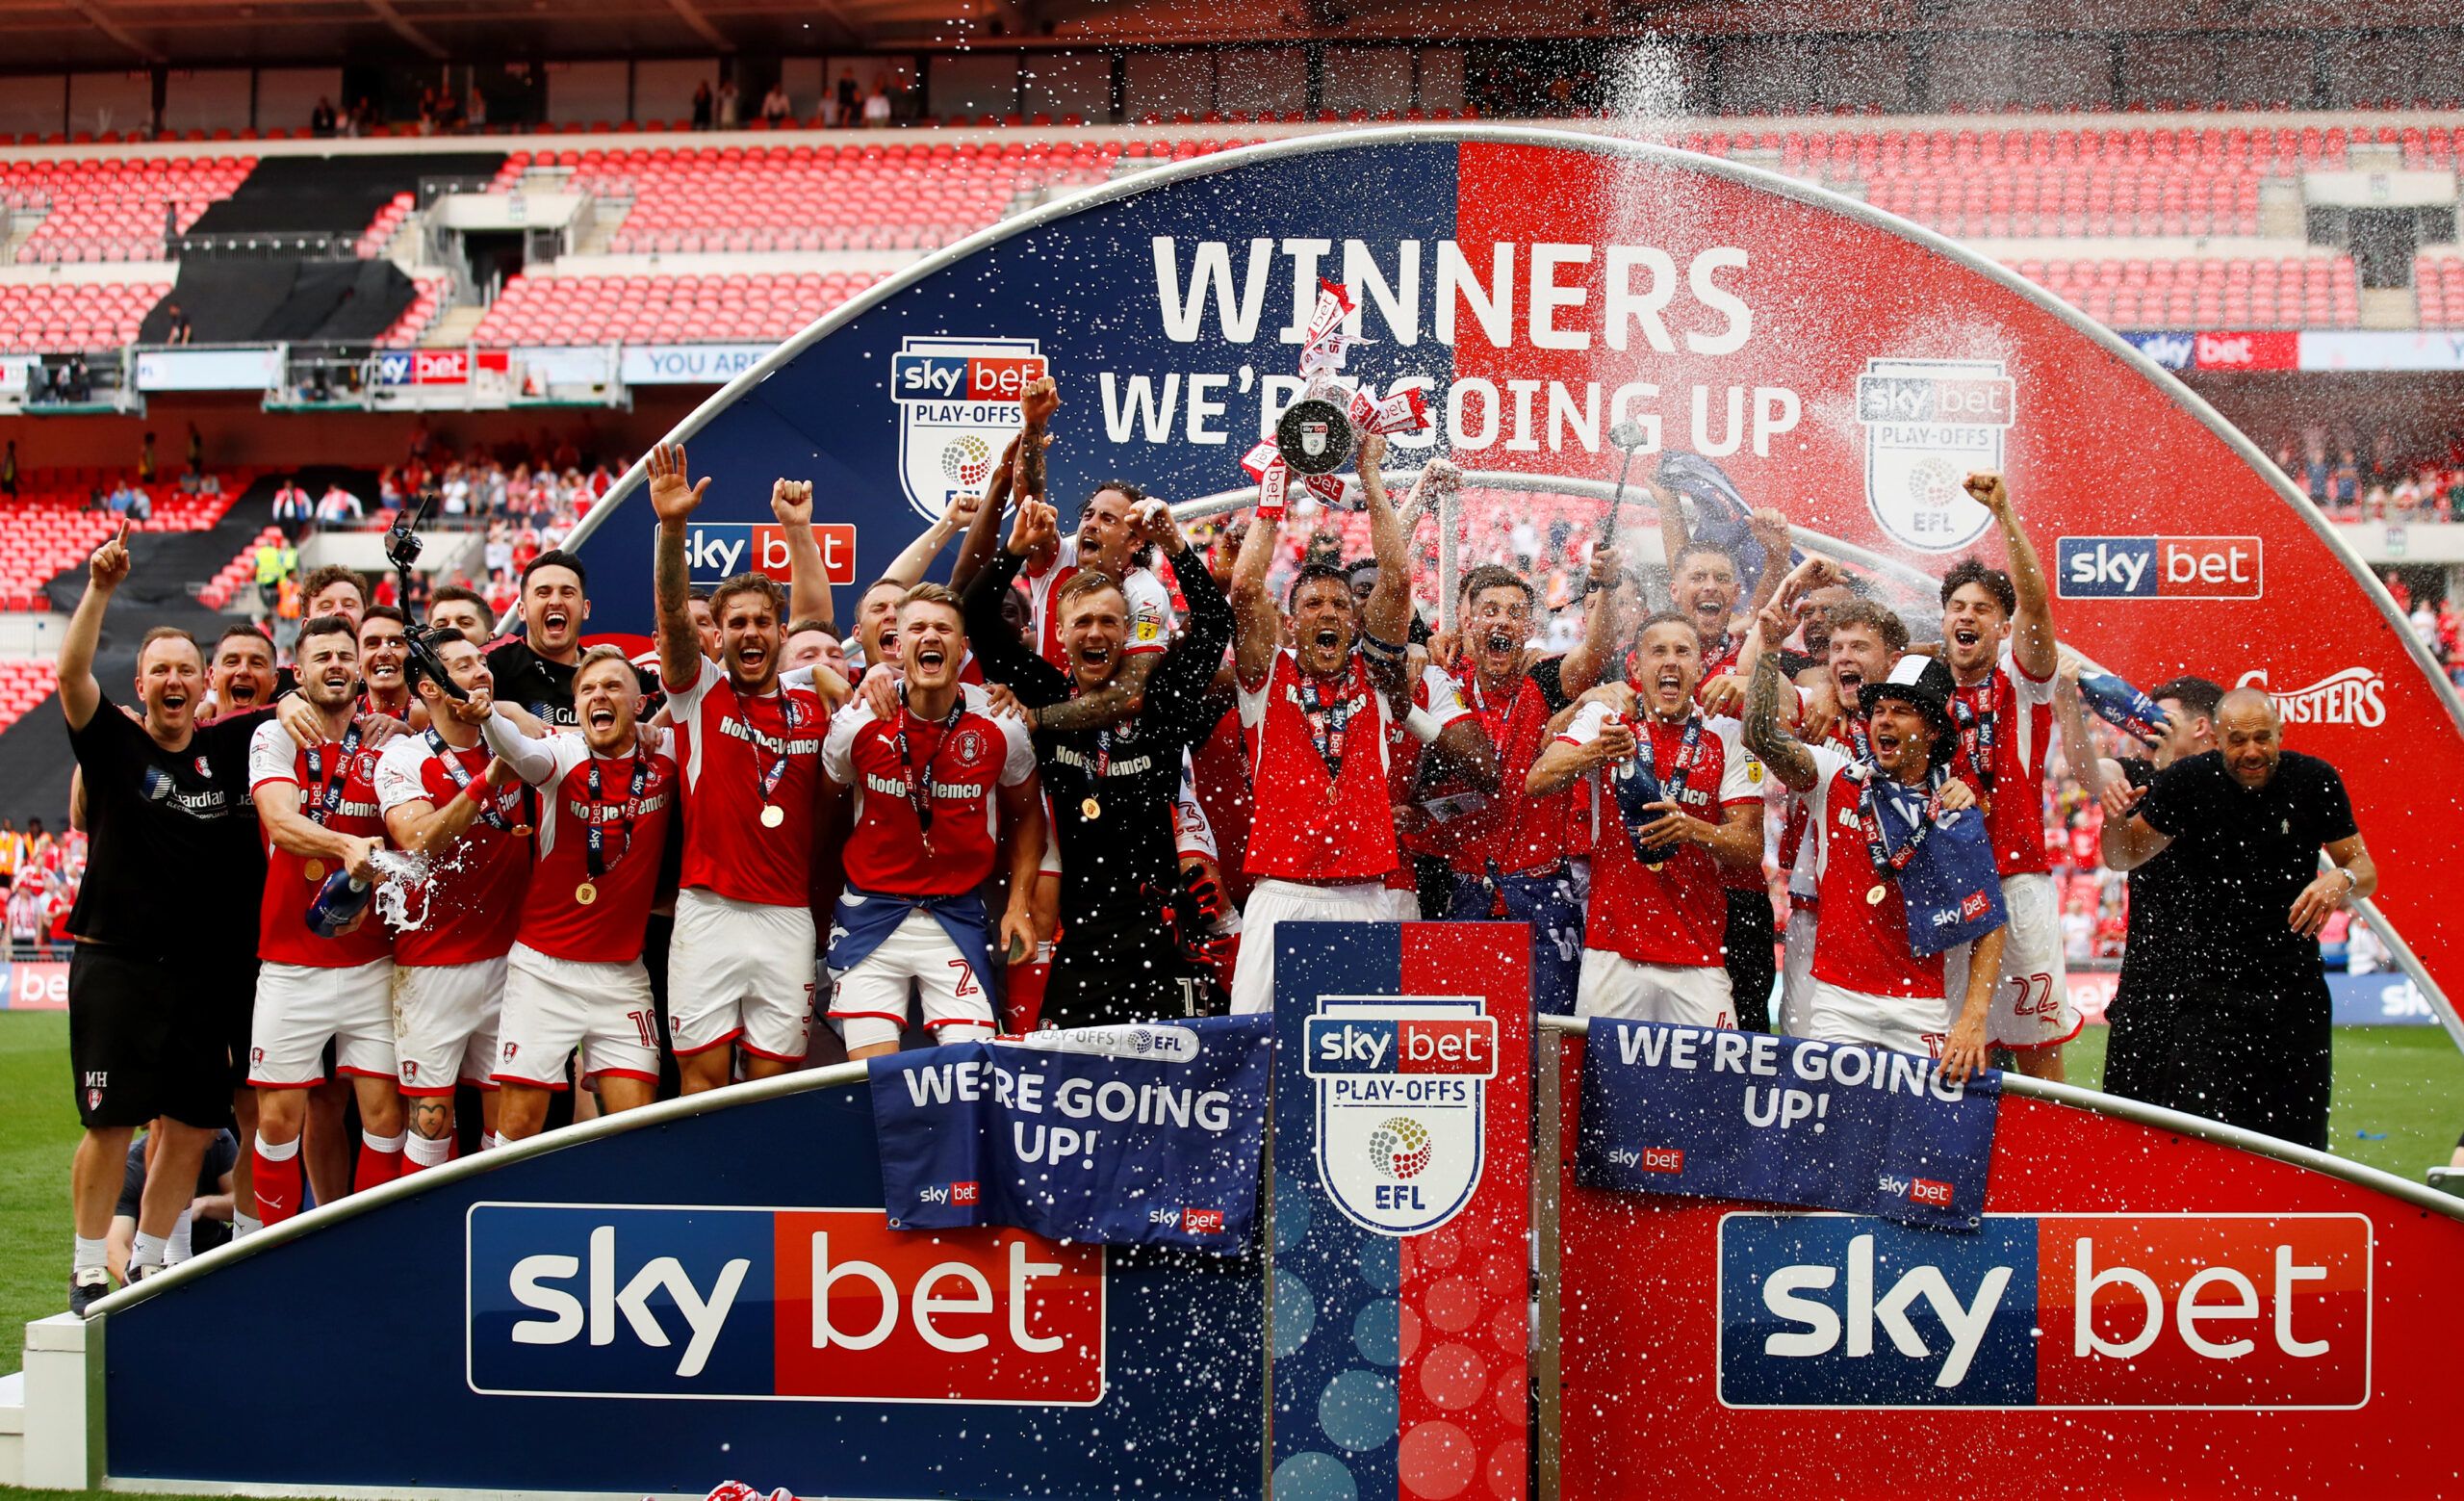 Soccer Football - League One Play-Off Final - Rotherham United v Shrewsbury Town - Wembley Stadium, London, Britain - May 27, 2018   Rotherham celebrate winning the League One Play-Off Final with the trophy      Action Images/Jason Cairnduff    EDITORIAL USE ONLY. No use with unauthorized audio, video, data, fixture lists, club/league logos or 